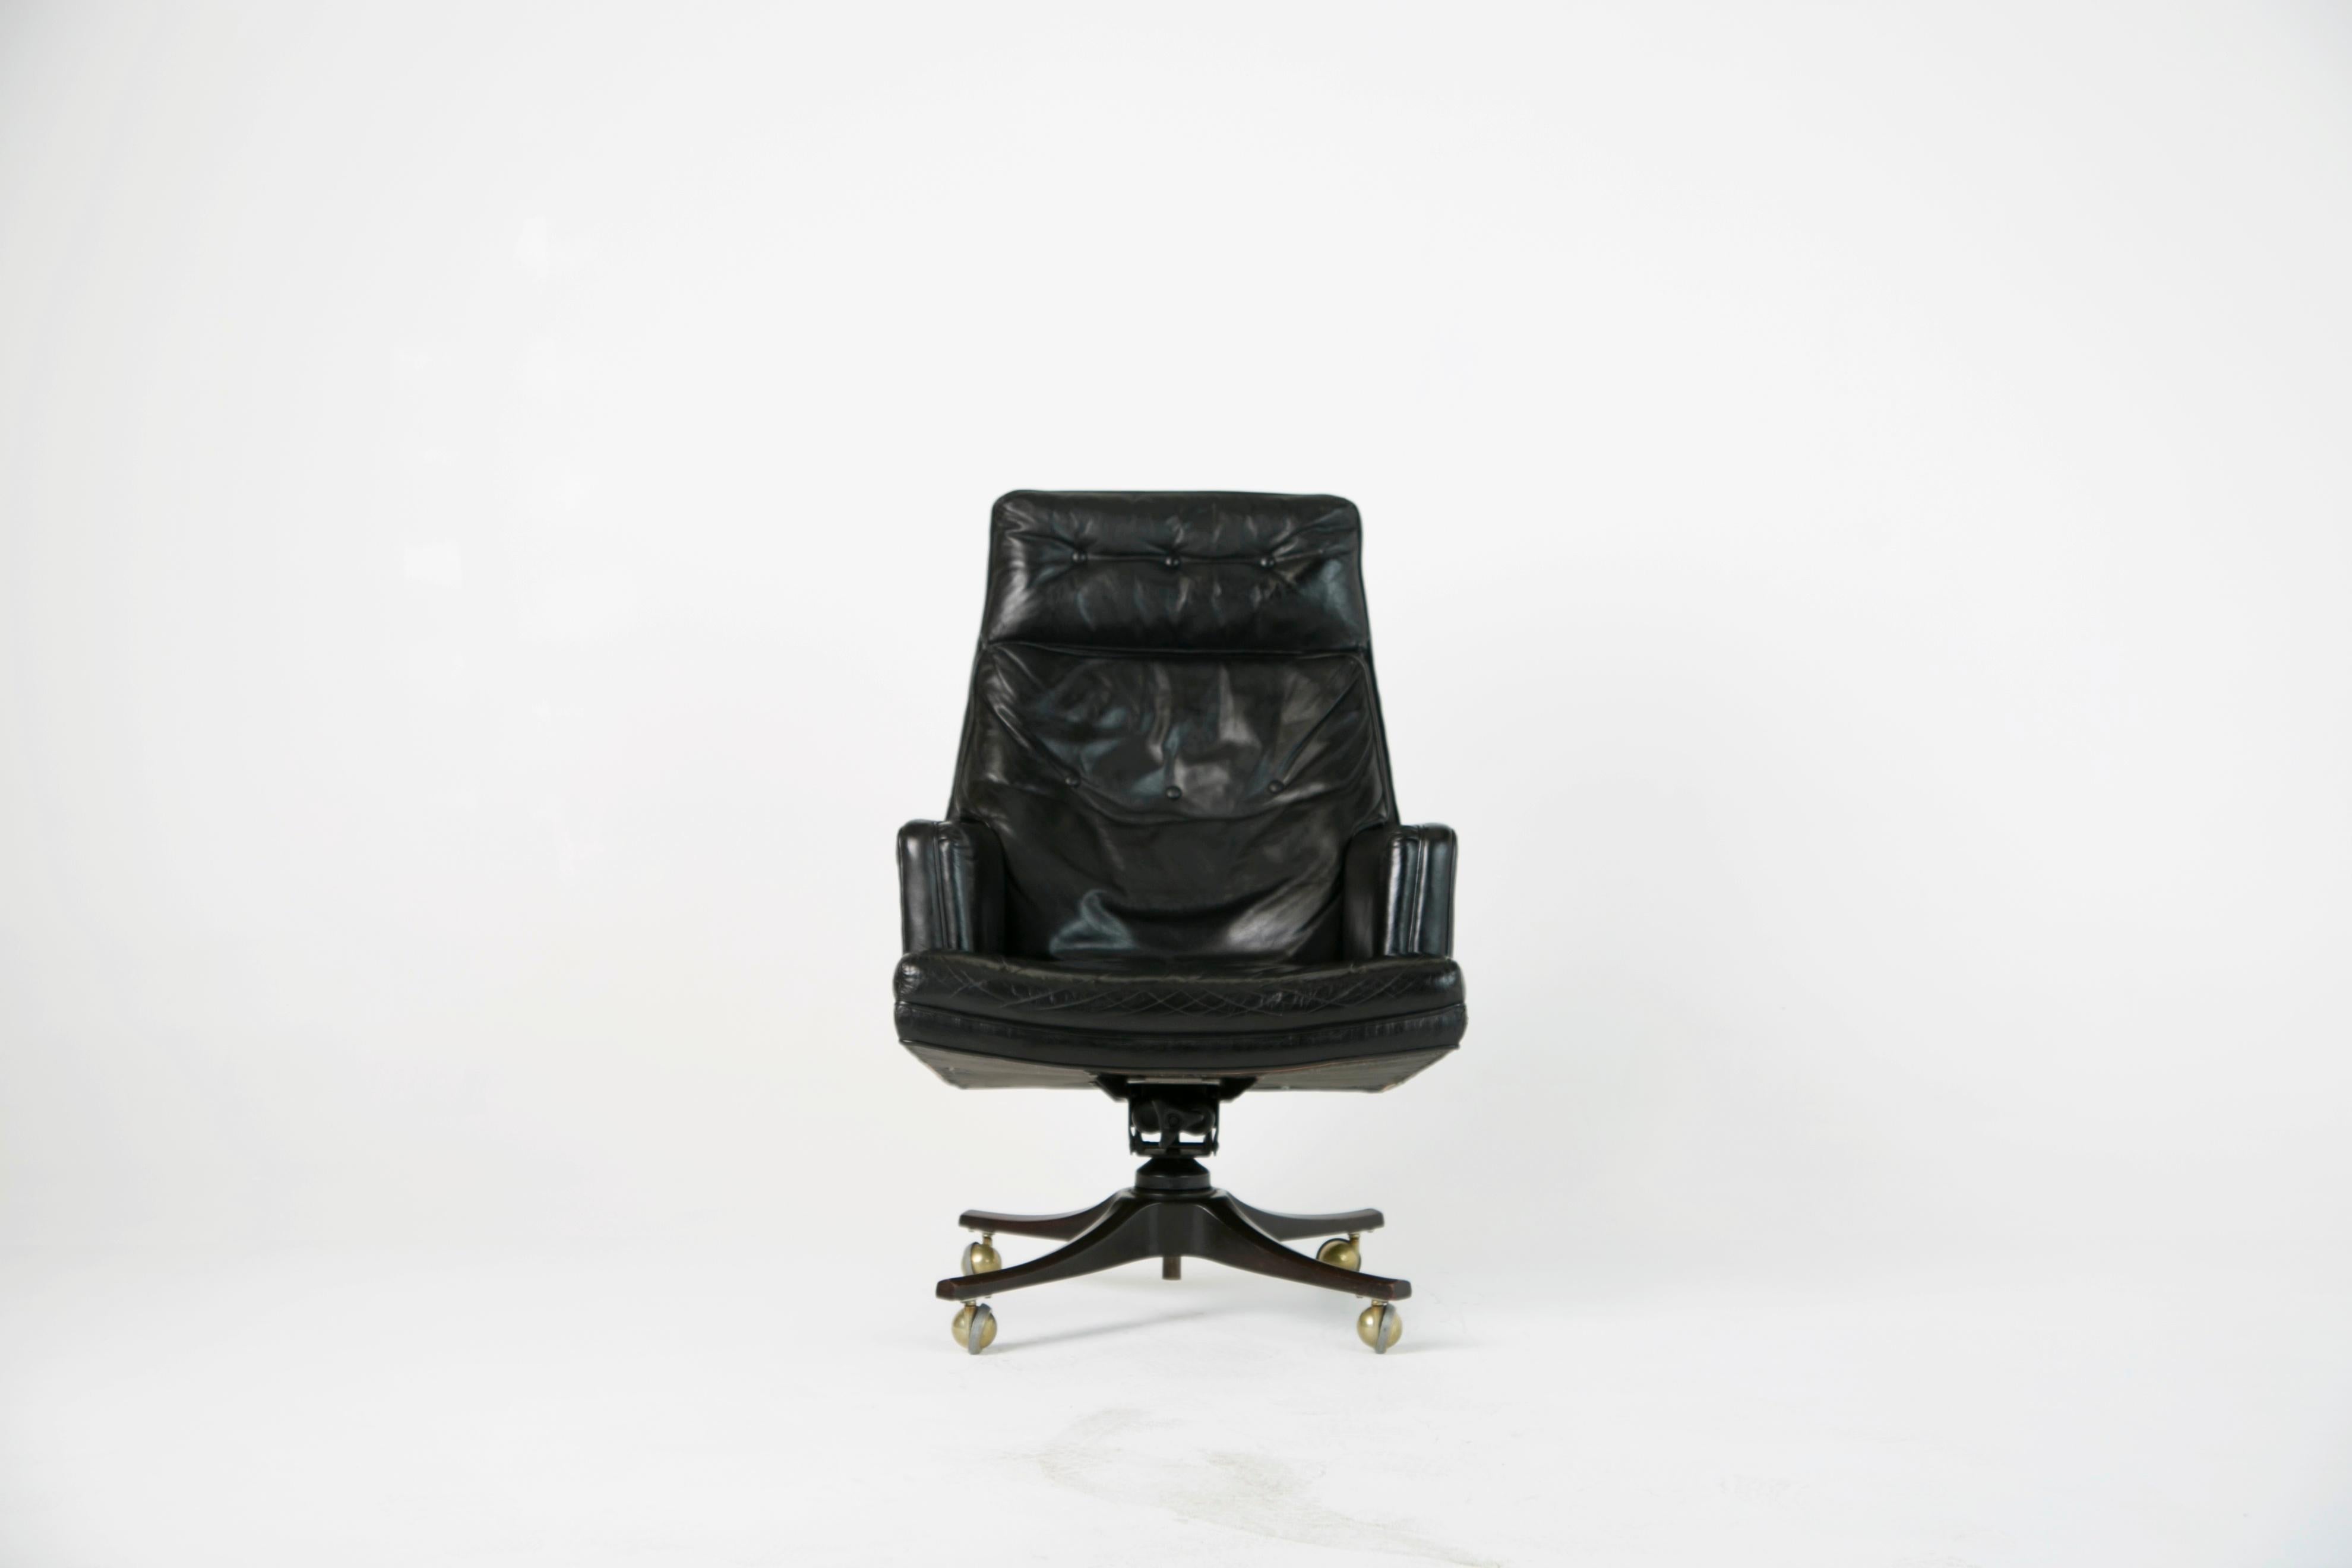 For the Executive with panache, this sizable black leather desk chair was designed by Edward Wormley and produced by Dunbar in the 1960s. This earlier production example has a sculpted wooden base rather than the later metal bases. Signed on the